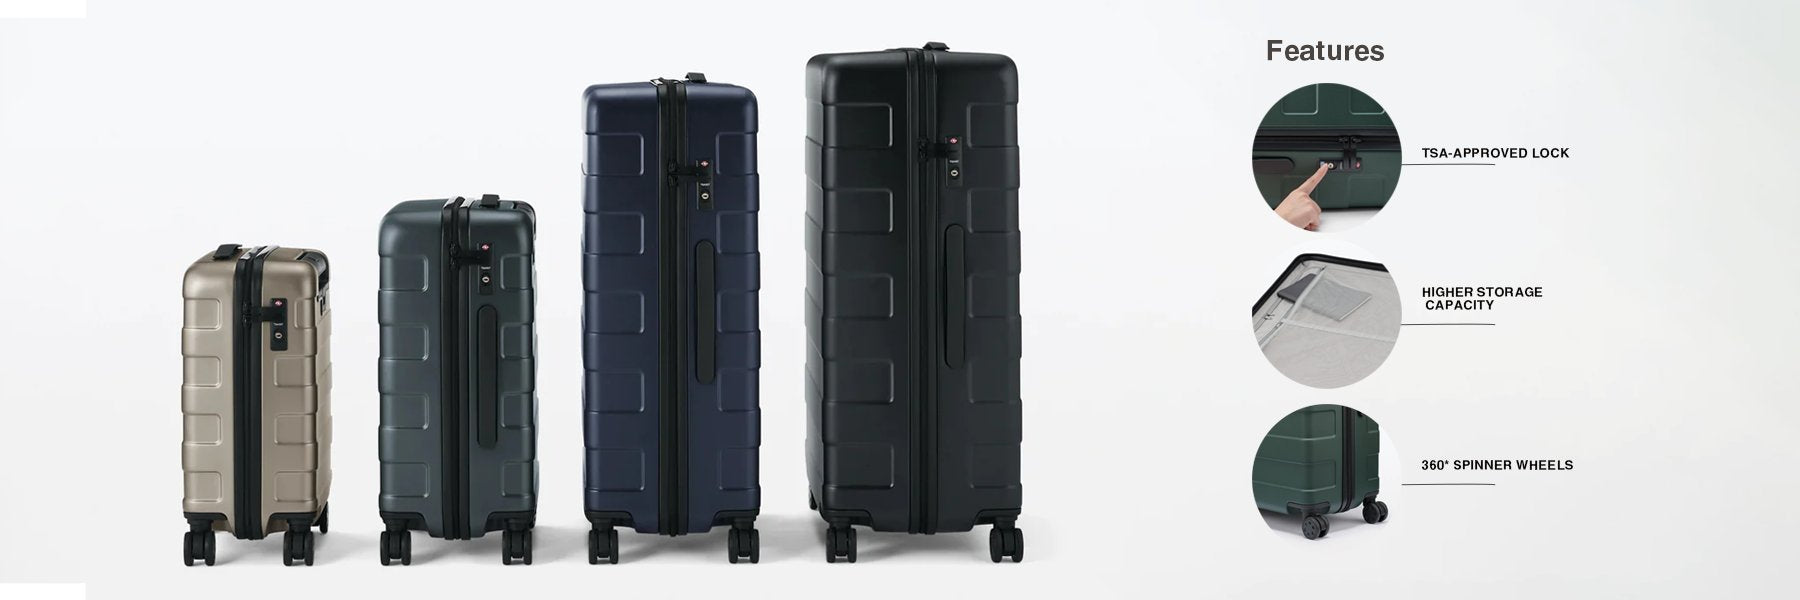 Hard carry luggage with features